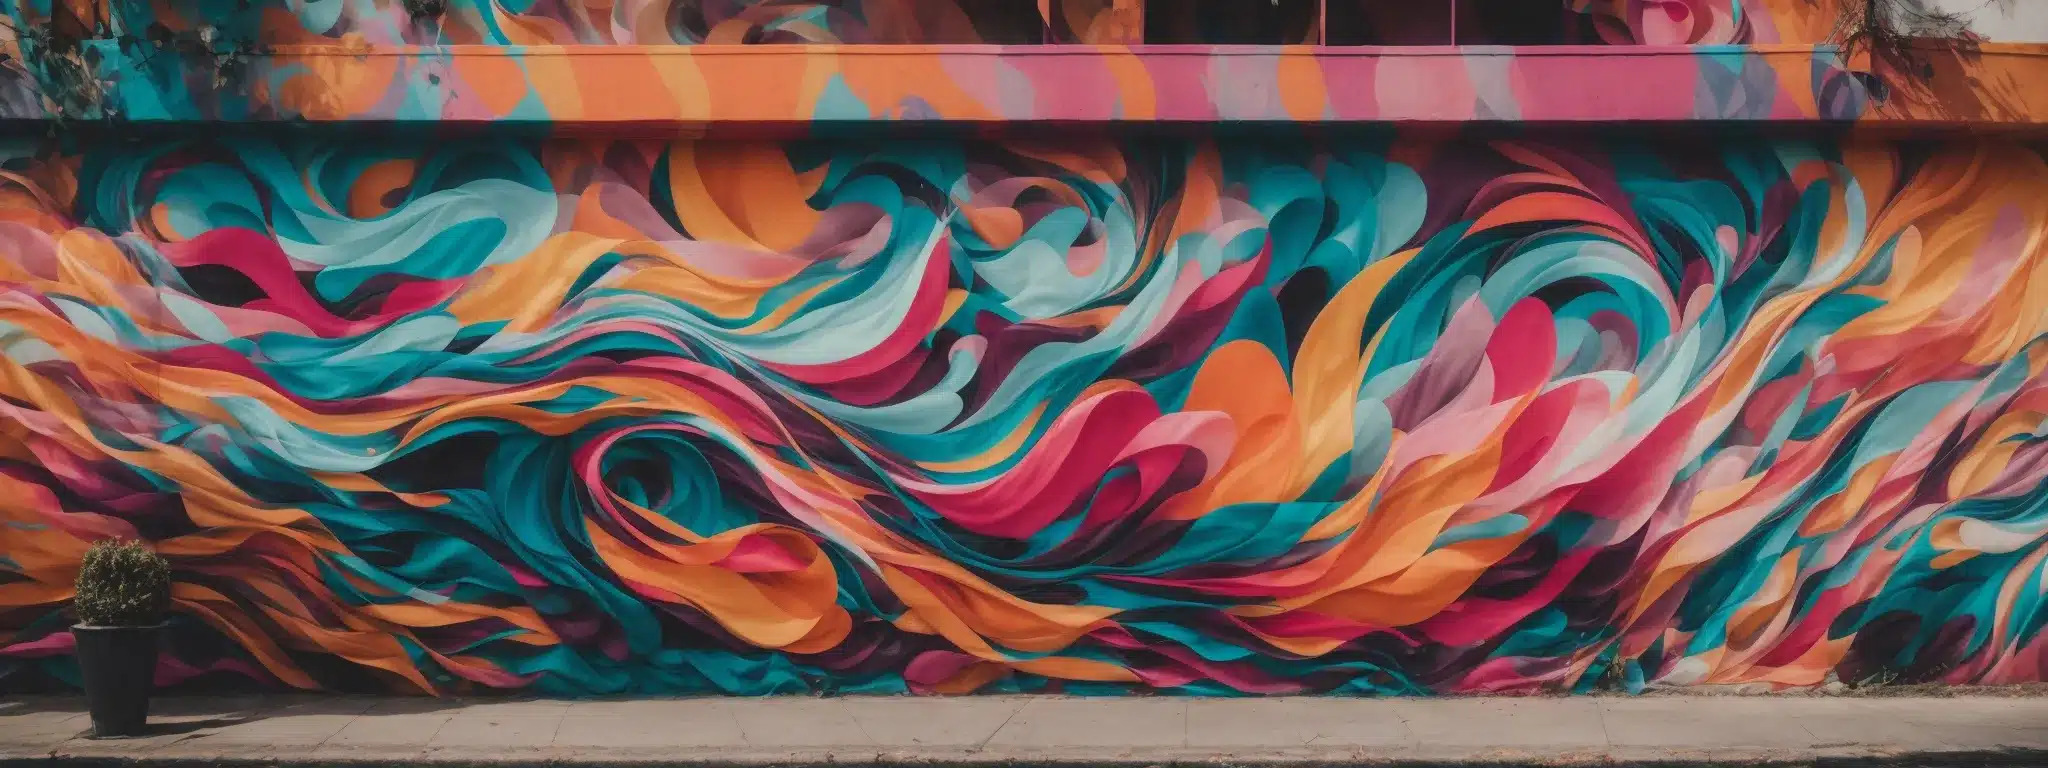 A Vibrant Street Mural With Abstract Colors And Shapes Captures The Lively Essence Of A Dynamic Brand Identity.